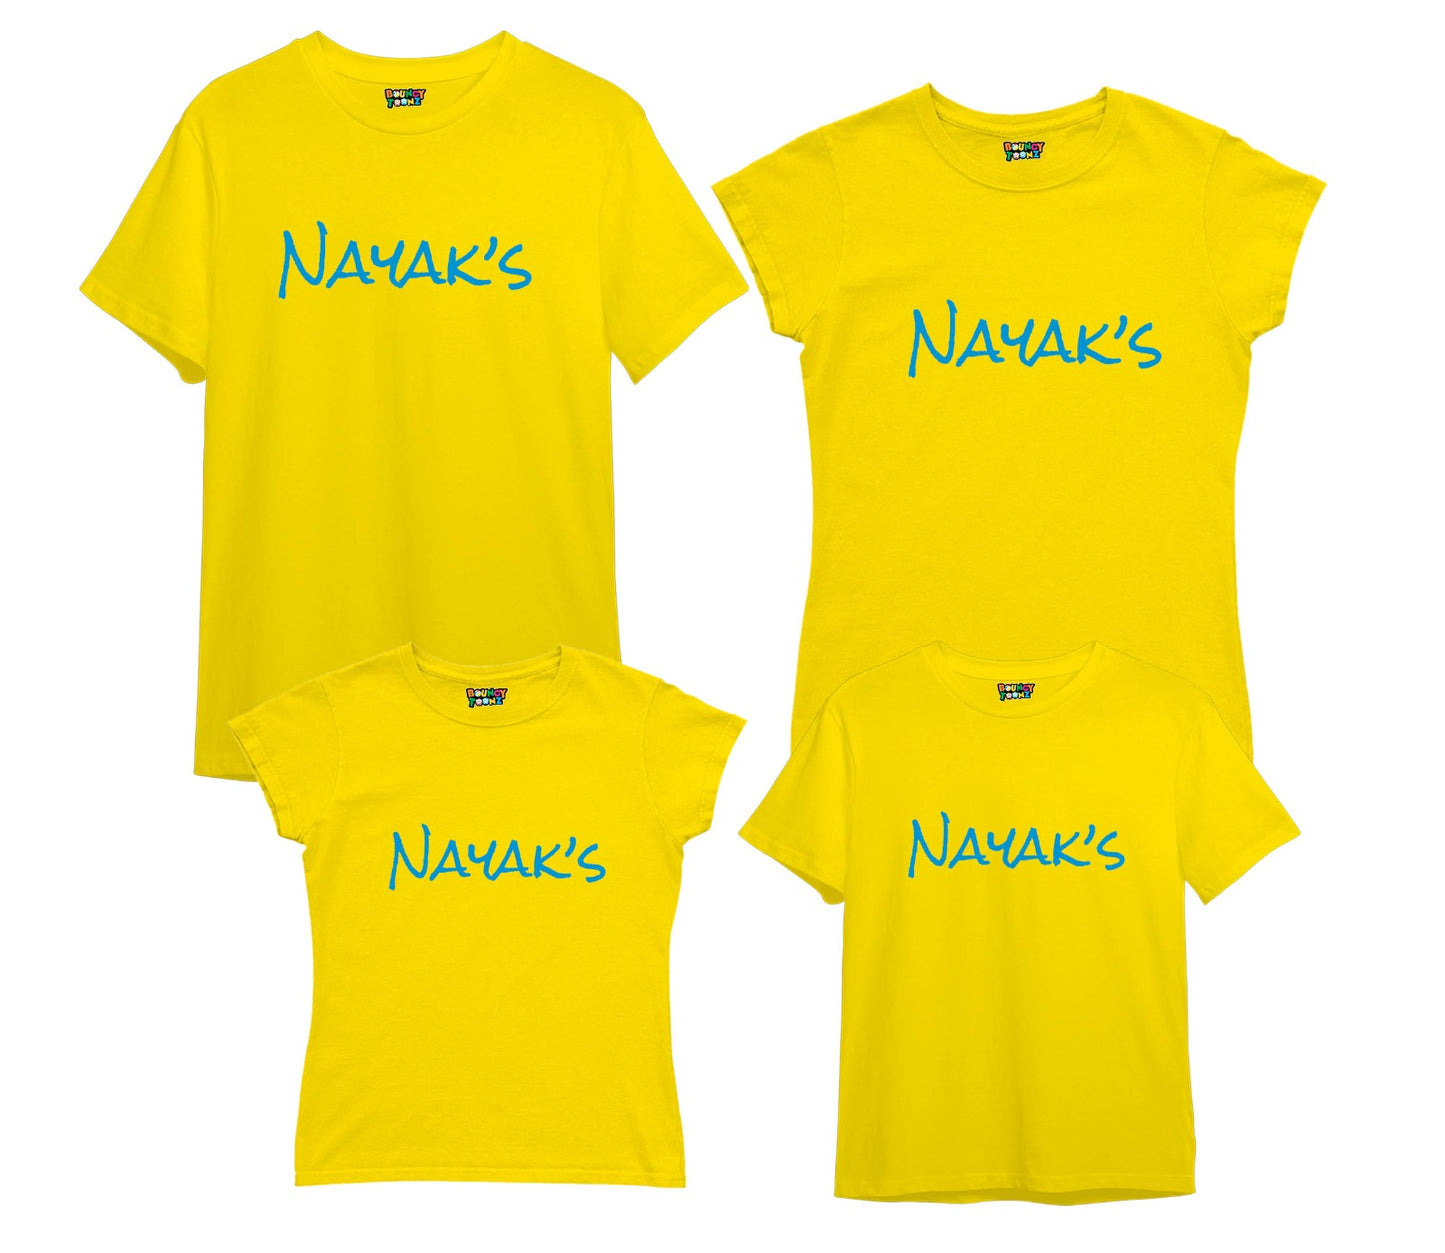 Customised Family Name/Caption Matching Family T-Shirts Set of 3 and 4 for Mom, Dad, Son & Daughter